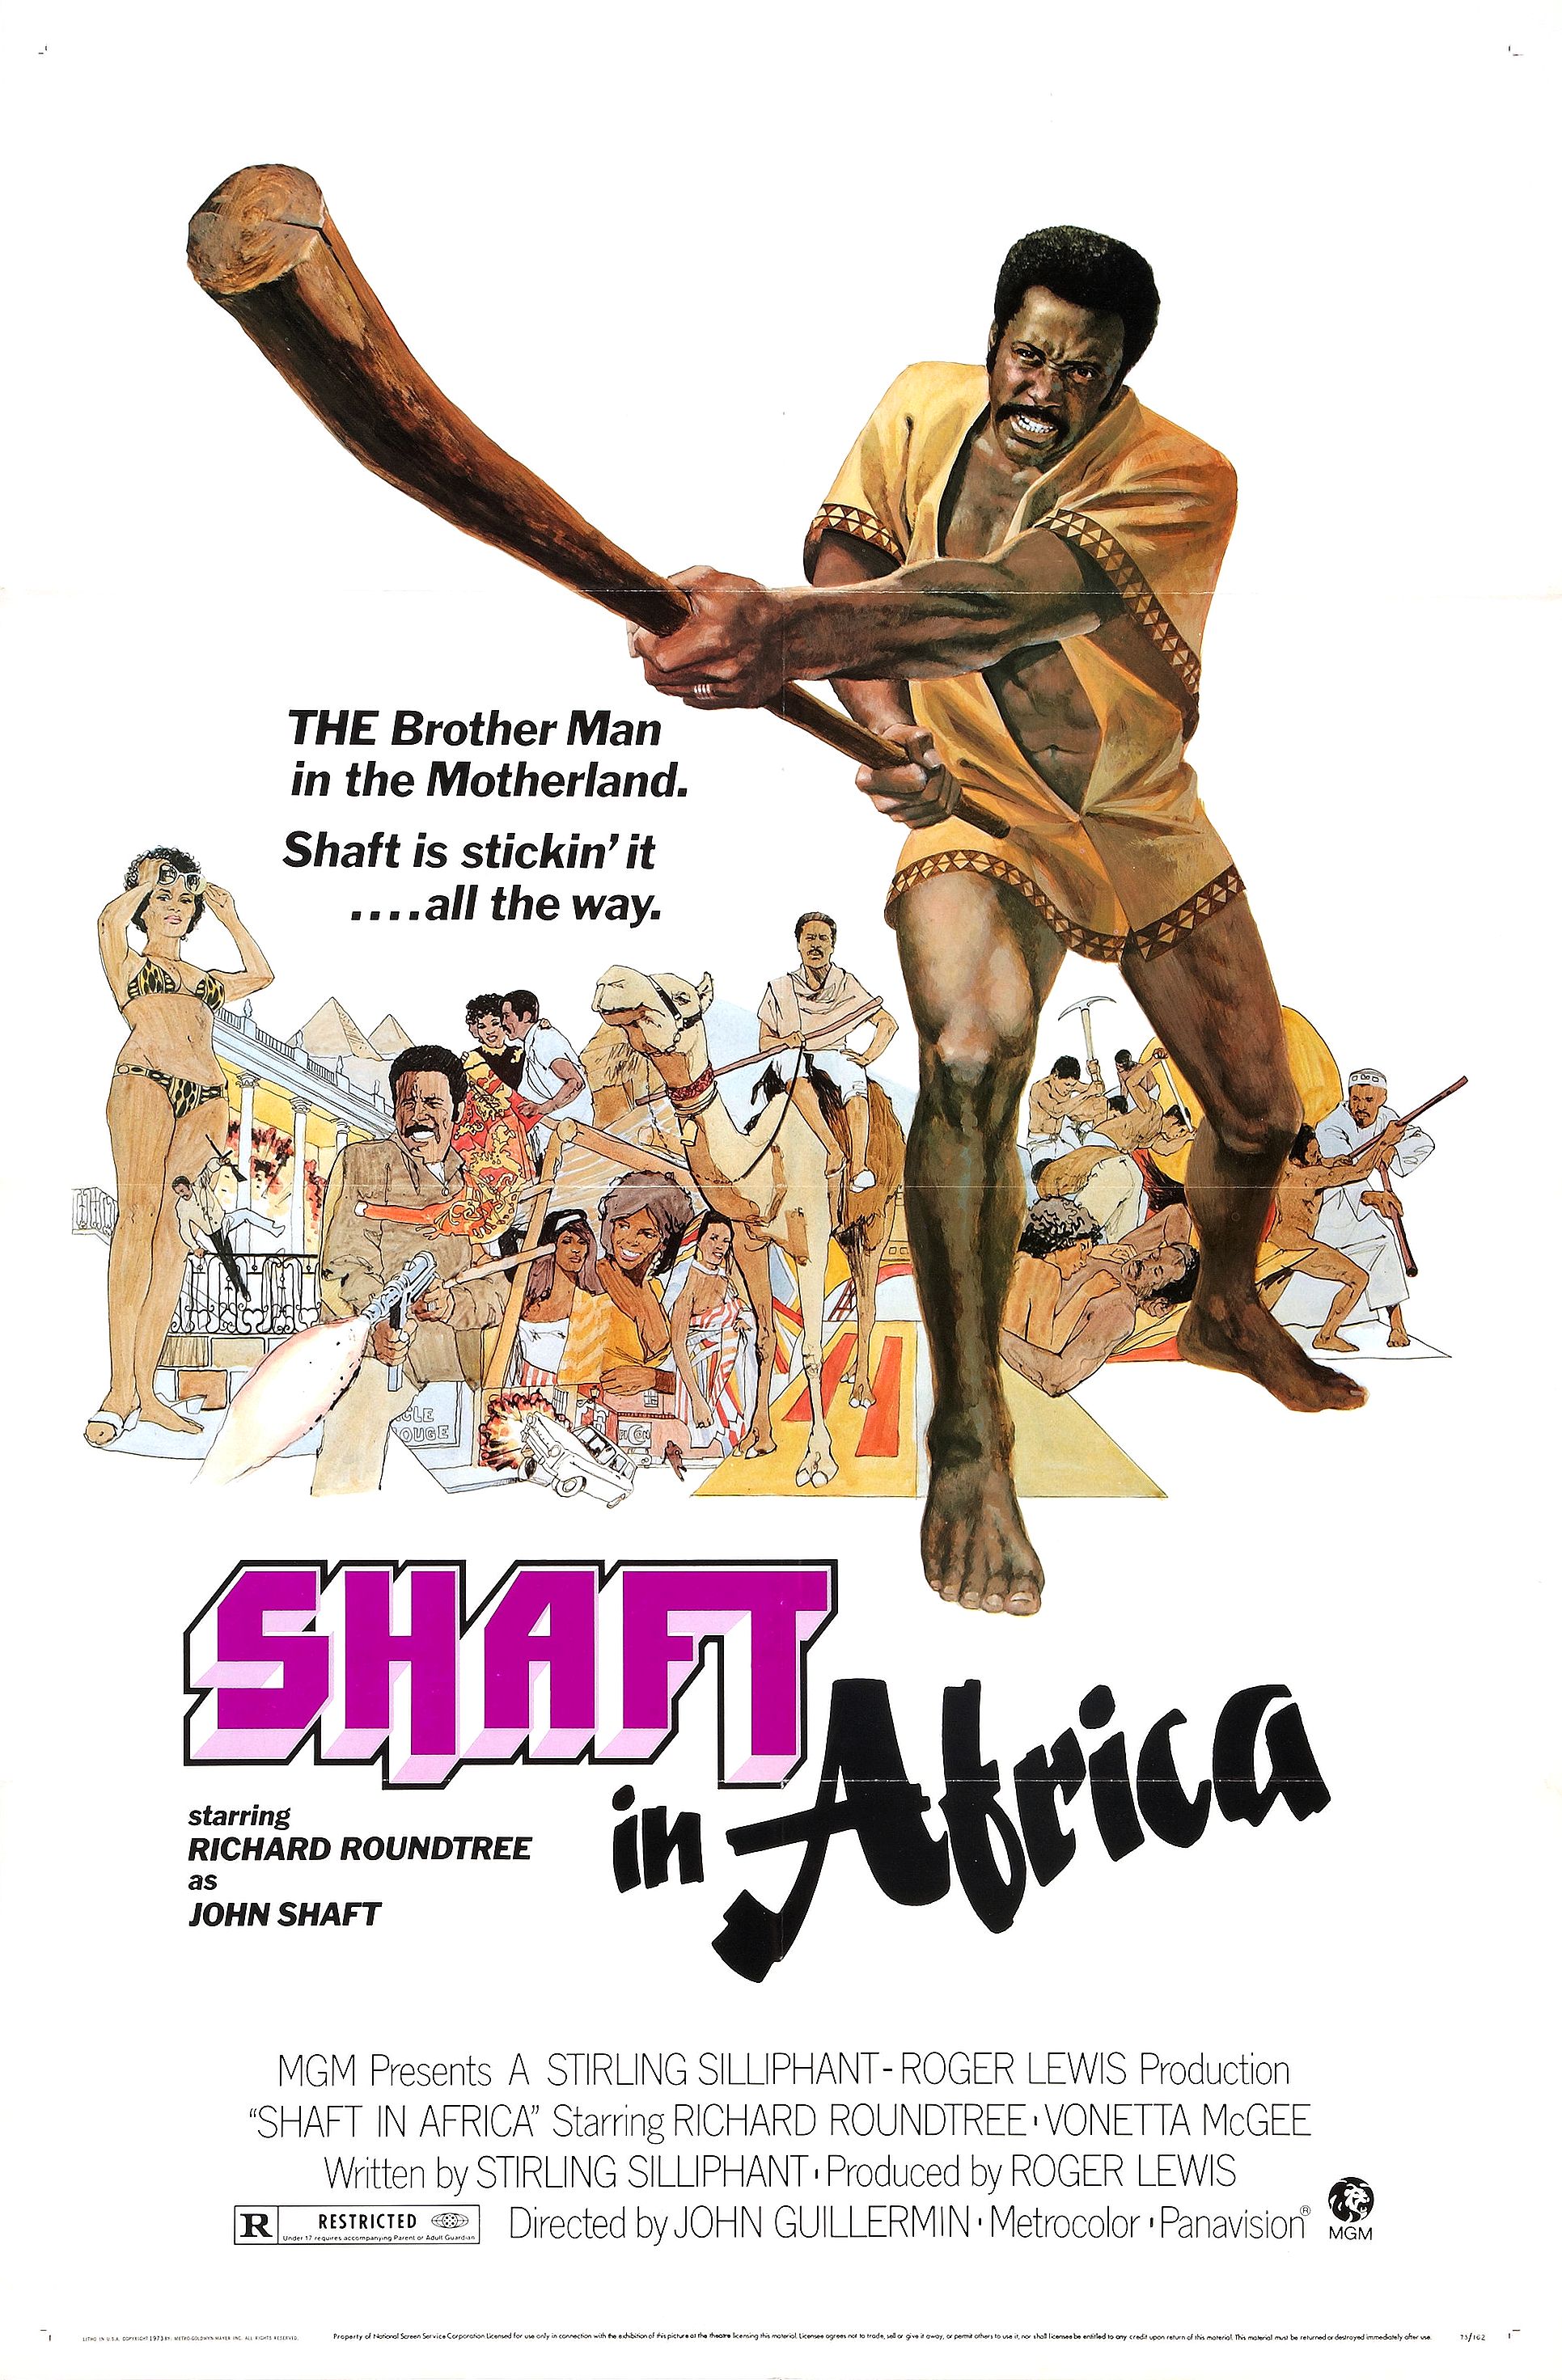 shaft in africa 1973 - The Brother Man in the Motherland. Shaft is stickin' it ... all the way. Ehaft Richard Roundtree John Shaft Mom Presents A String SllpwntRoger Lewis Production Shaft In Africa Starring Richard Roundtree Vonetta Mogee Vintten by Stru